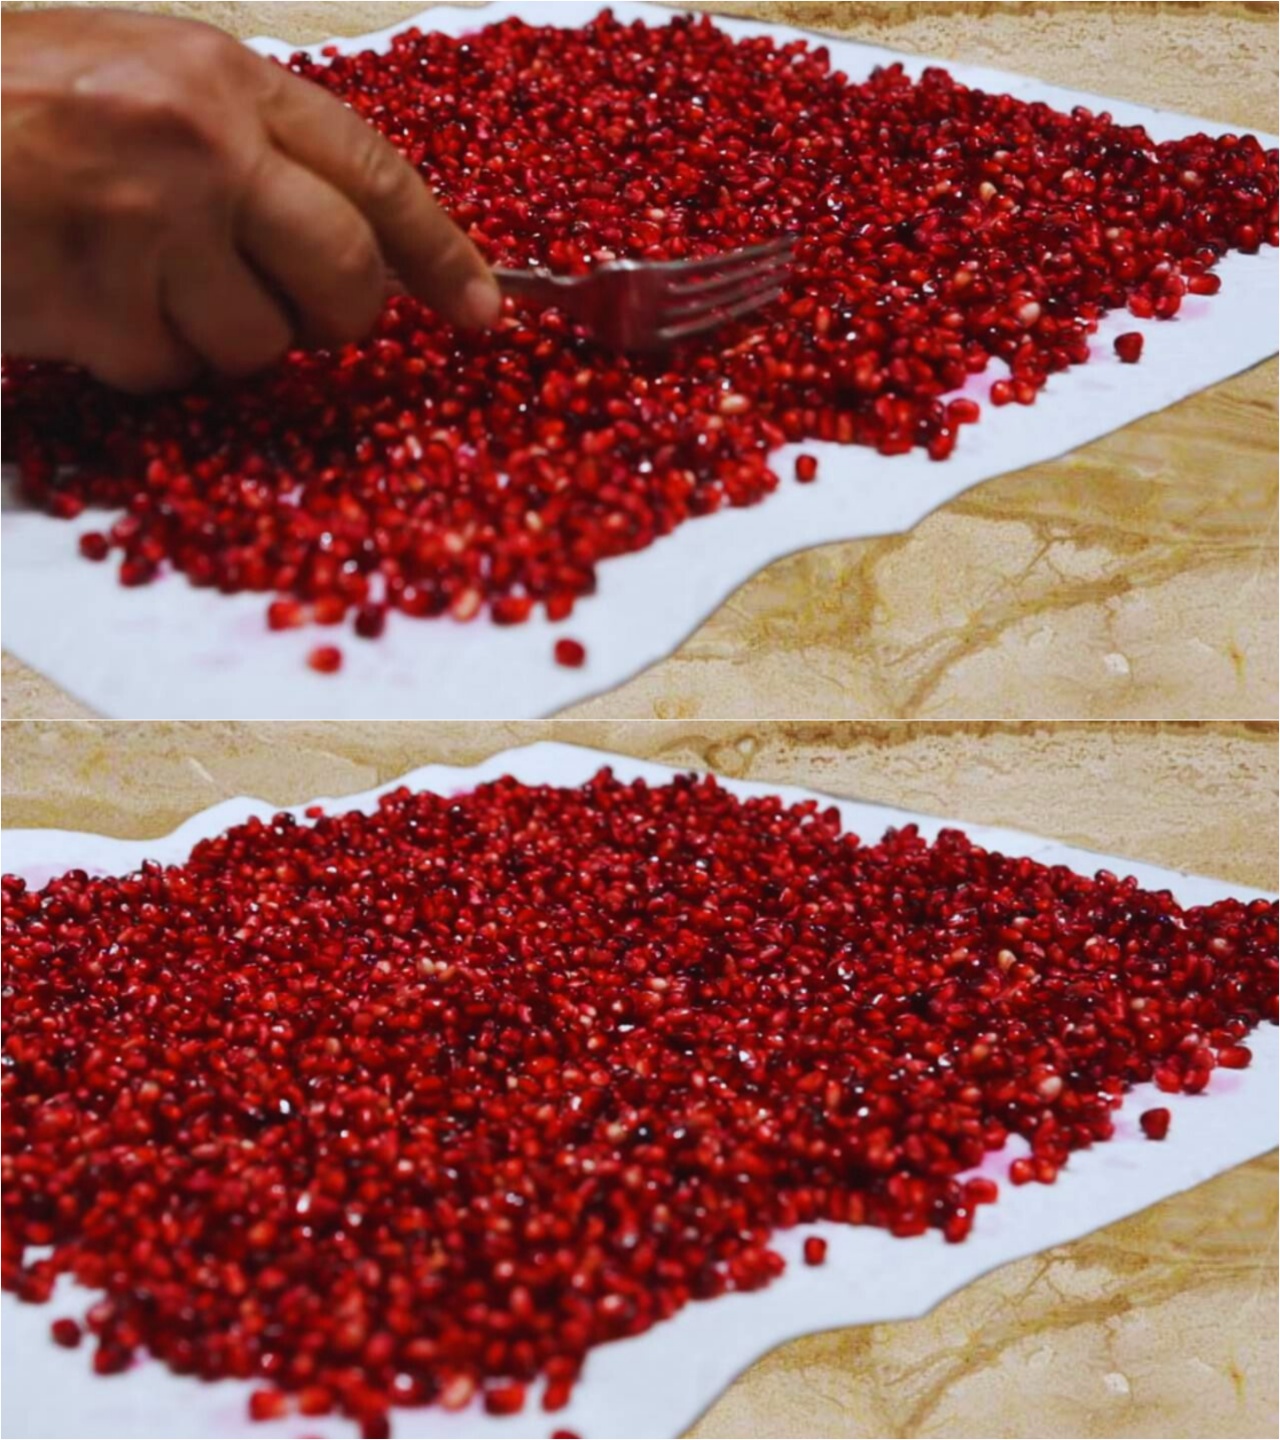 pomegranate seeds on a paper towel